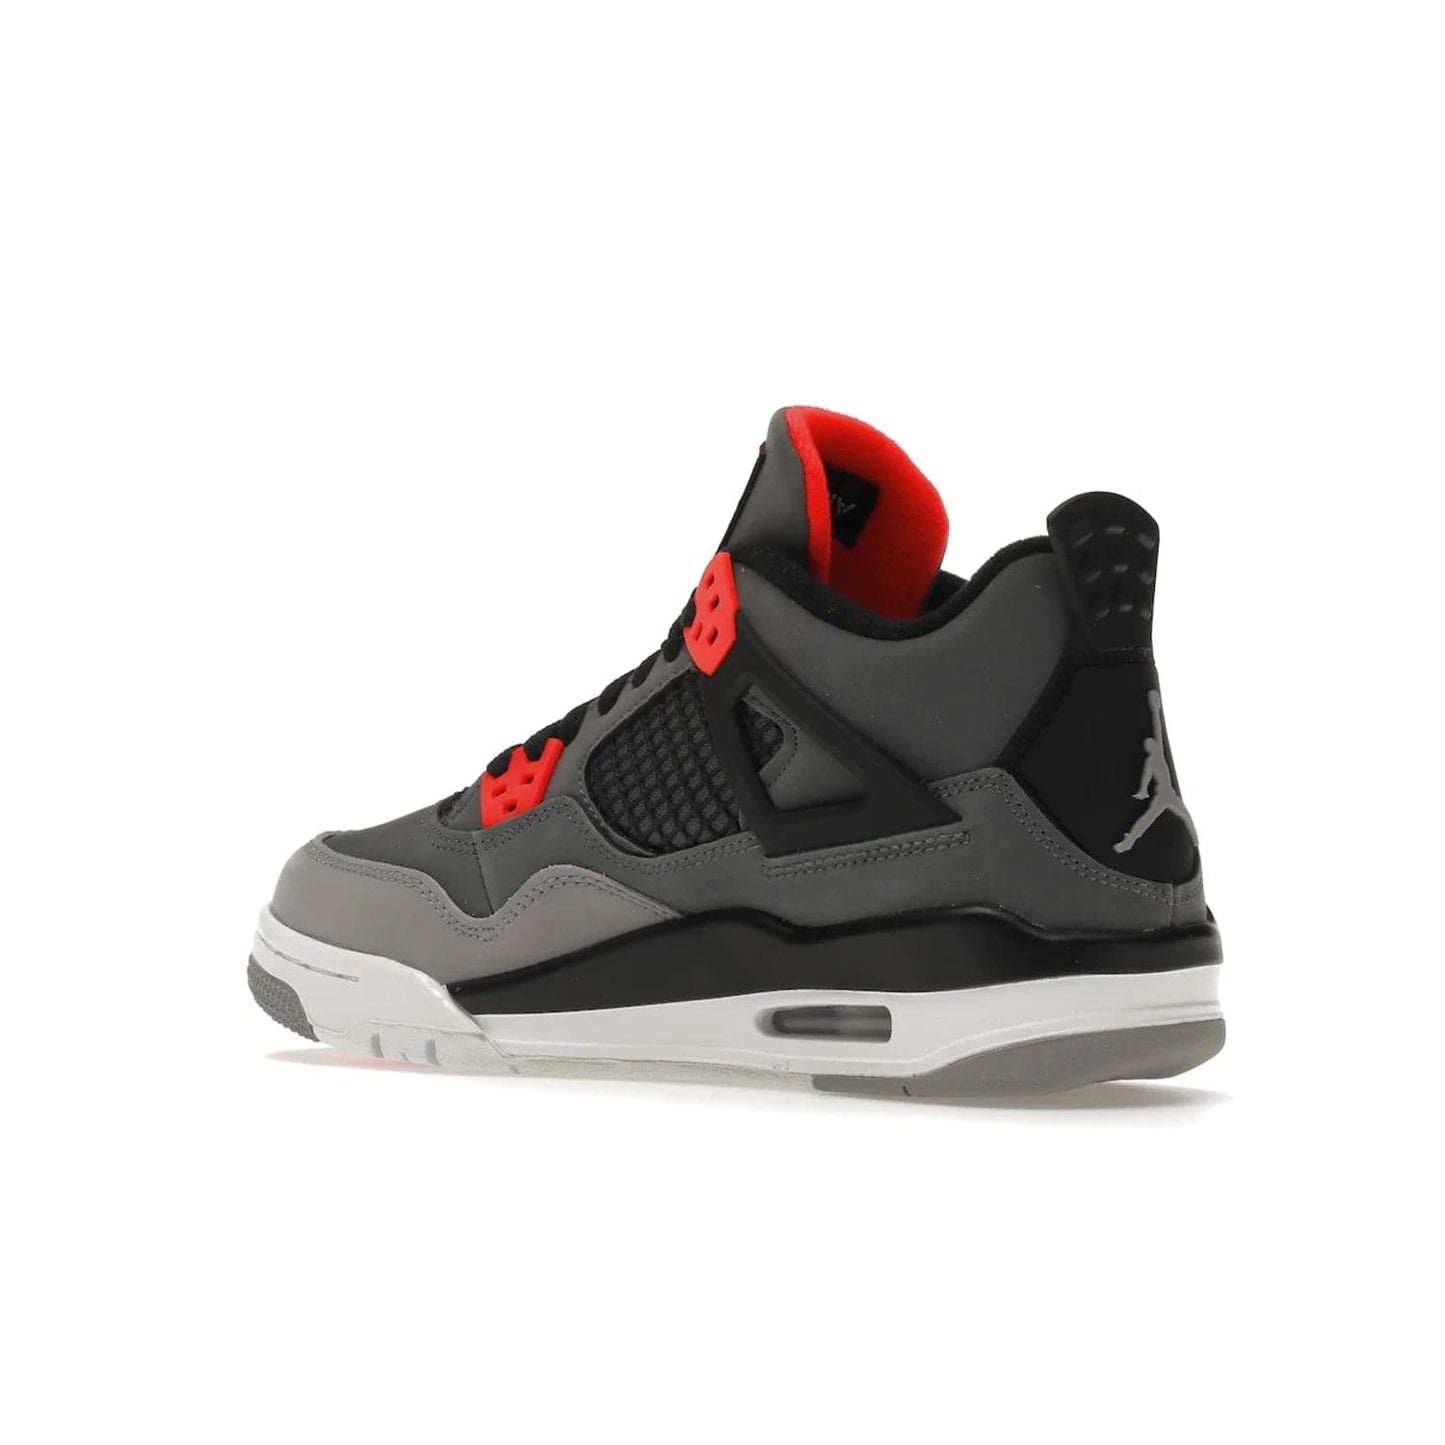 Jordan 4 Retro Infrared (GS) - Image 23 - Only at www.BallersClubKickz.com - Shop the Air Jordan 4 Retro Infrared (GS) for a classic silhouette with subtle yet bold features. Dark grey nubuck upper with lighter forefoot overlay, black accents, Infrared molded eyelets & woven tongue tag. Available June 2022.